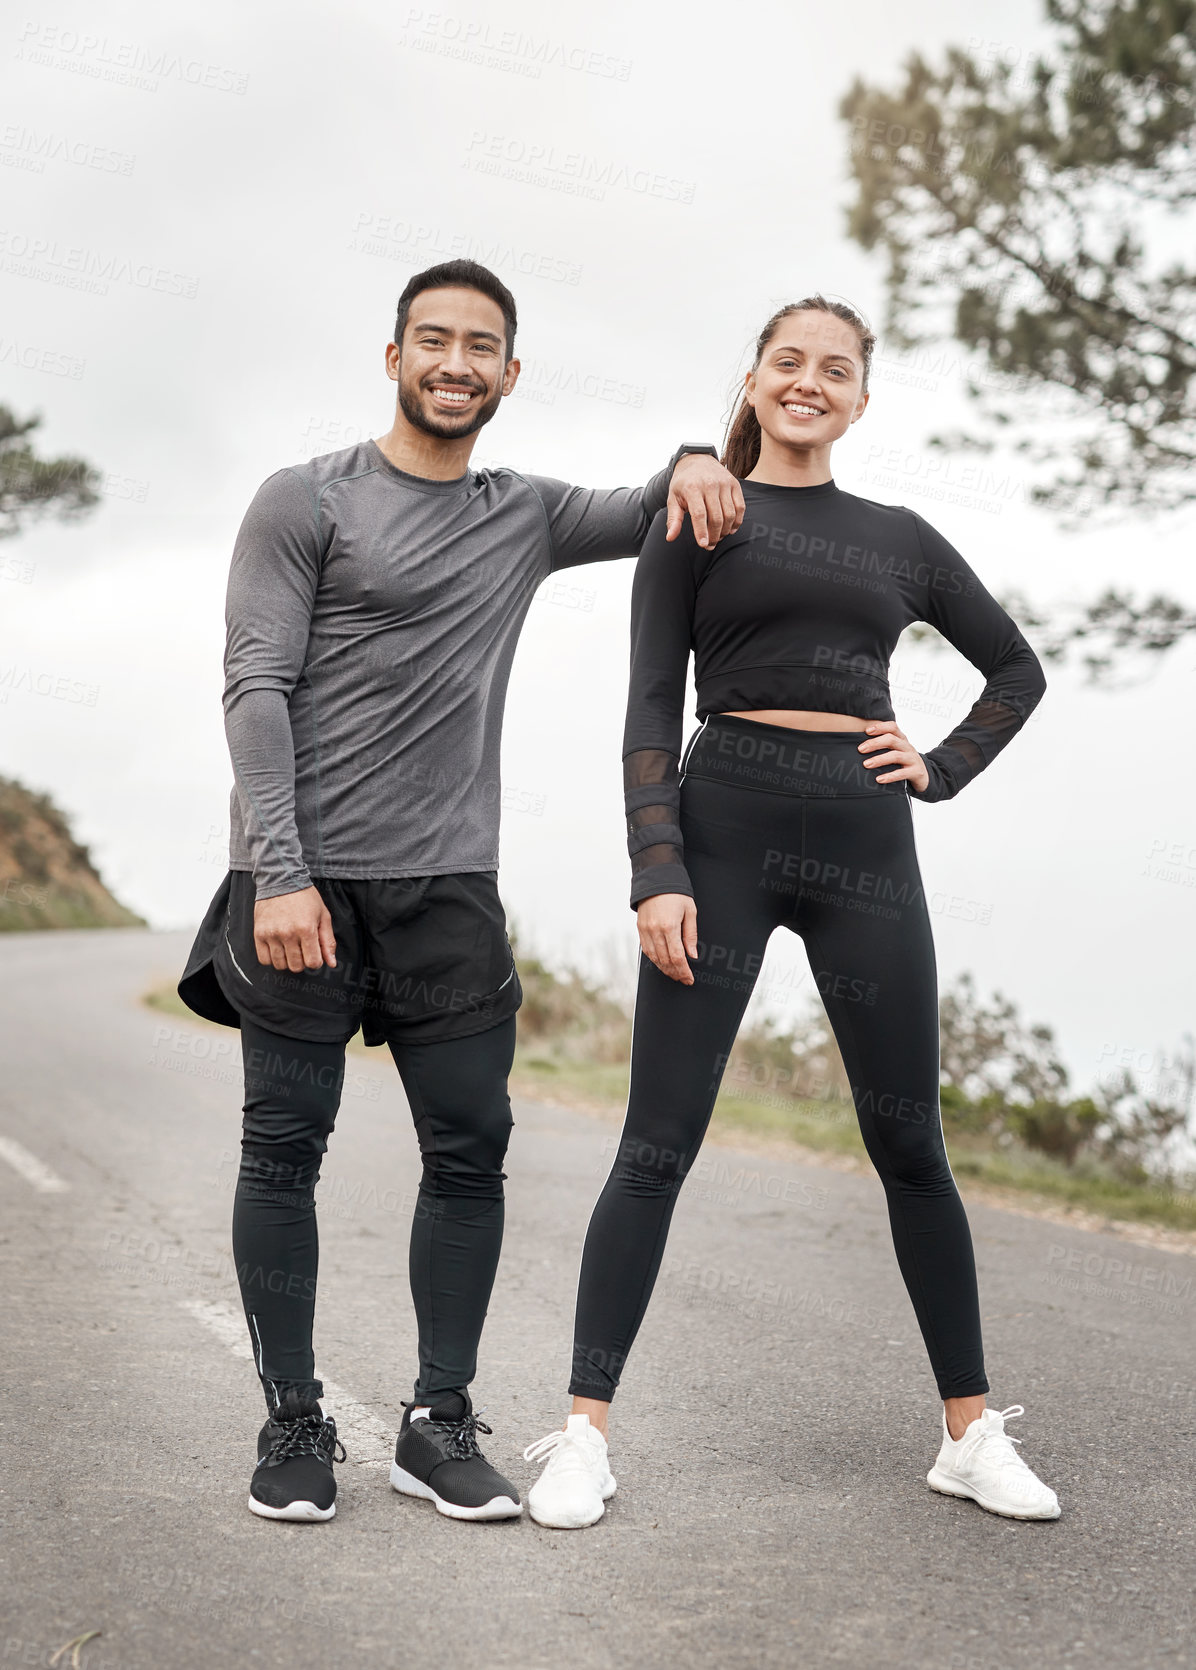 Buy stock photo Full length portrait of two young athletes standing together after their run outdoors